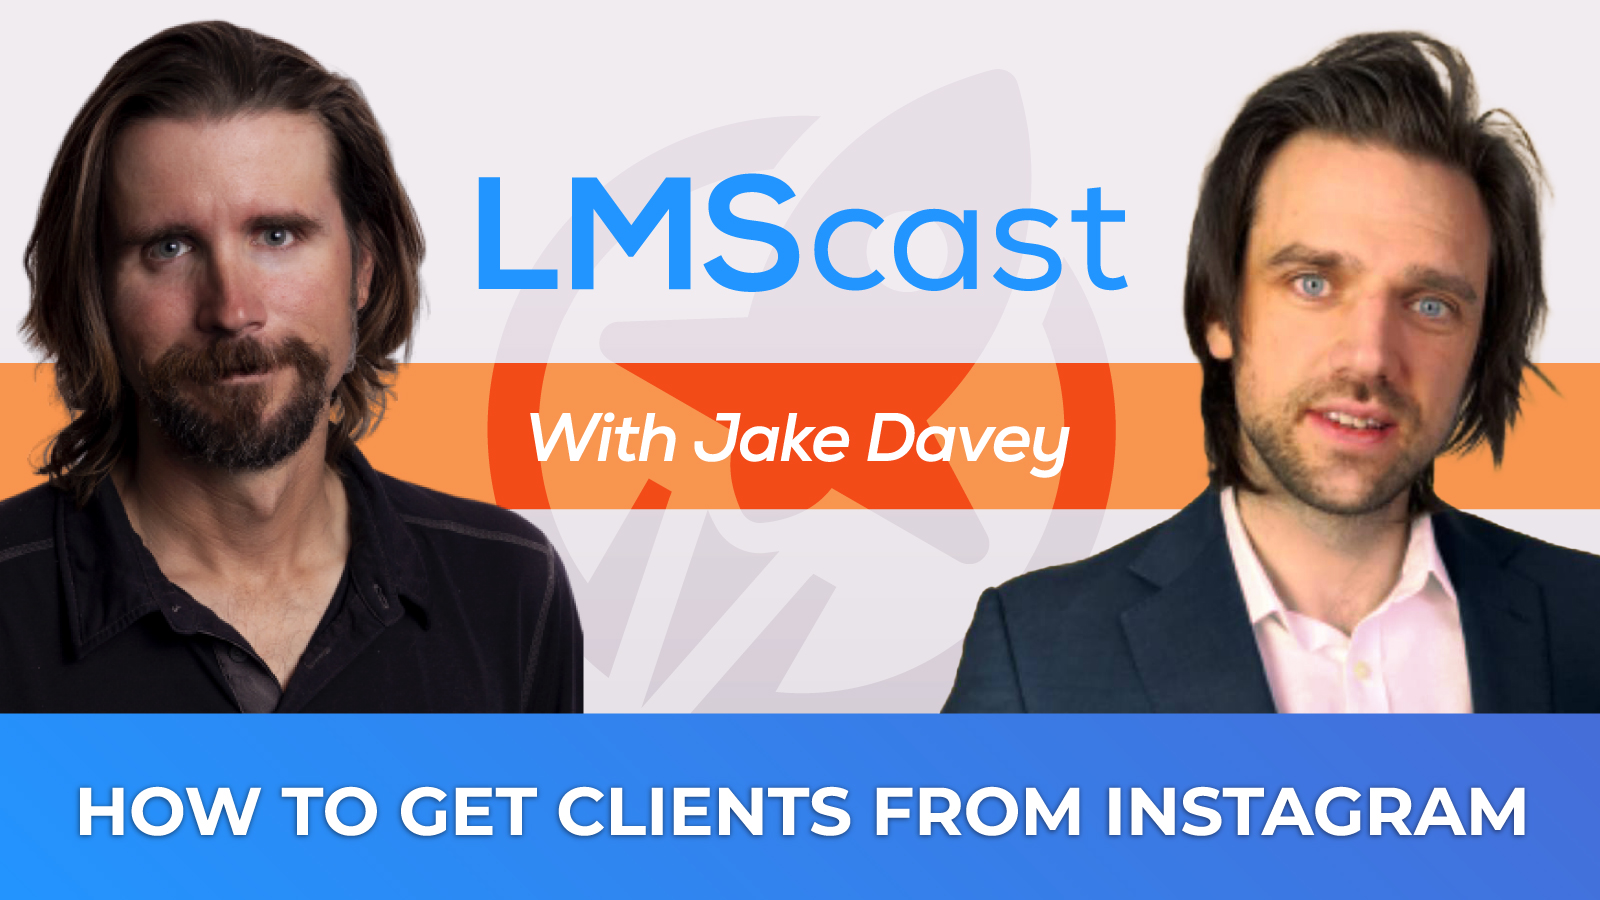 How to Get Clients from Instagram with Jake Davey